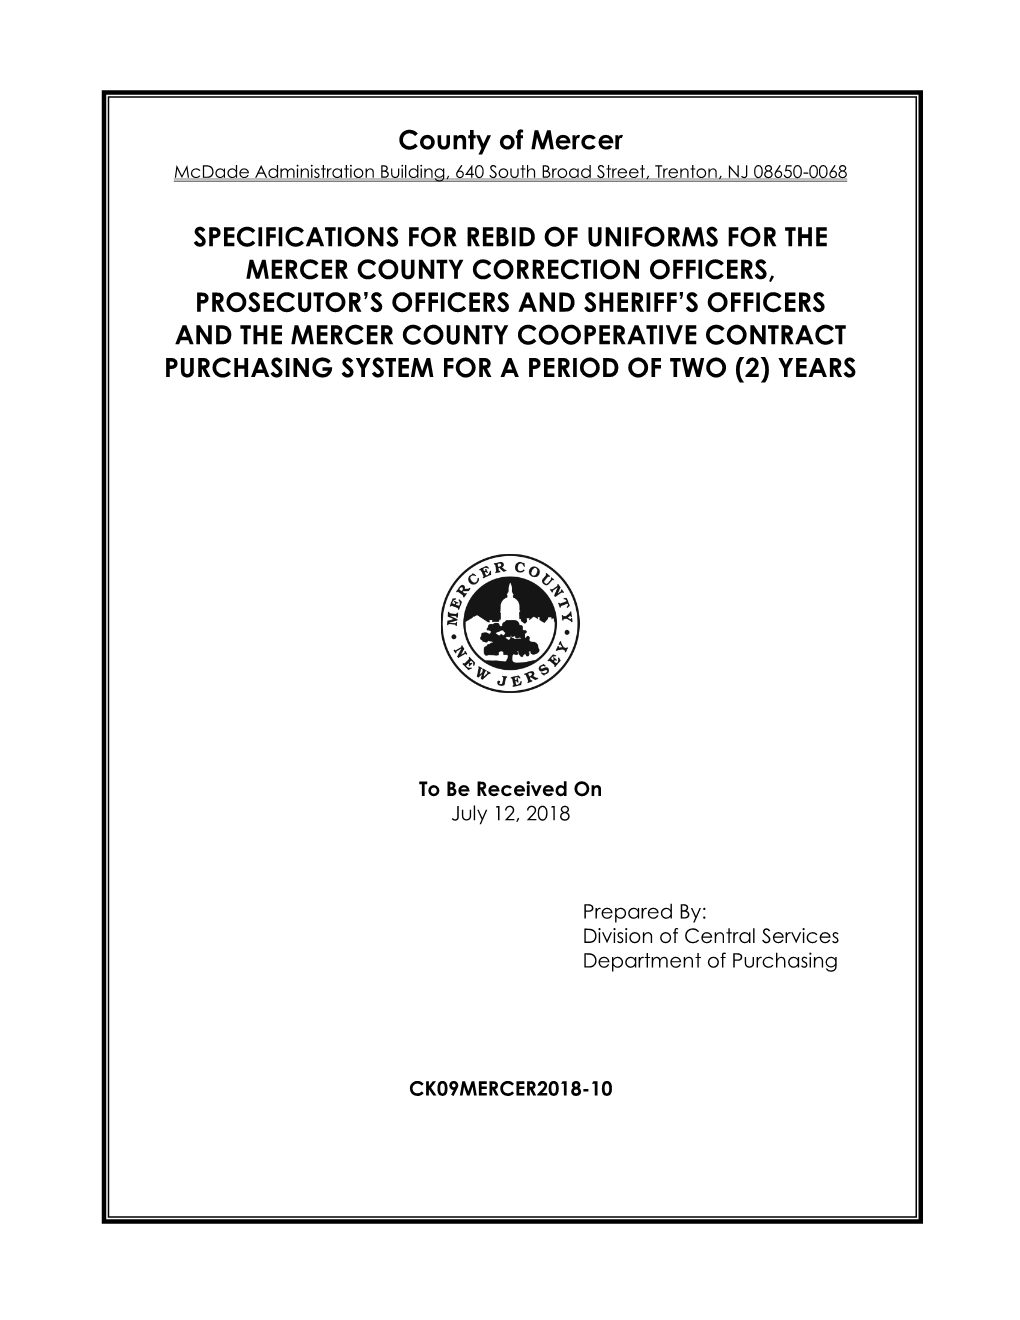 County of Mercer SPECIFICATIONS for REBID of UNIFORMS for the MERCER COUNTY CORRECTION OFFICERS, PROSECUTOR's OFFICERS and S